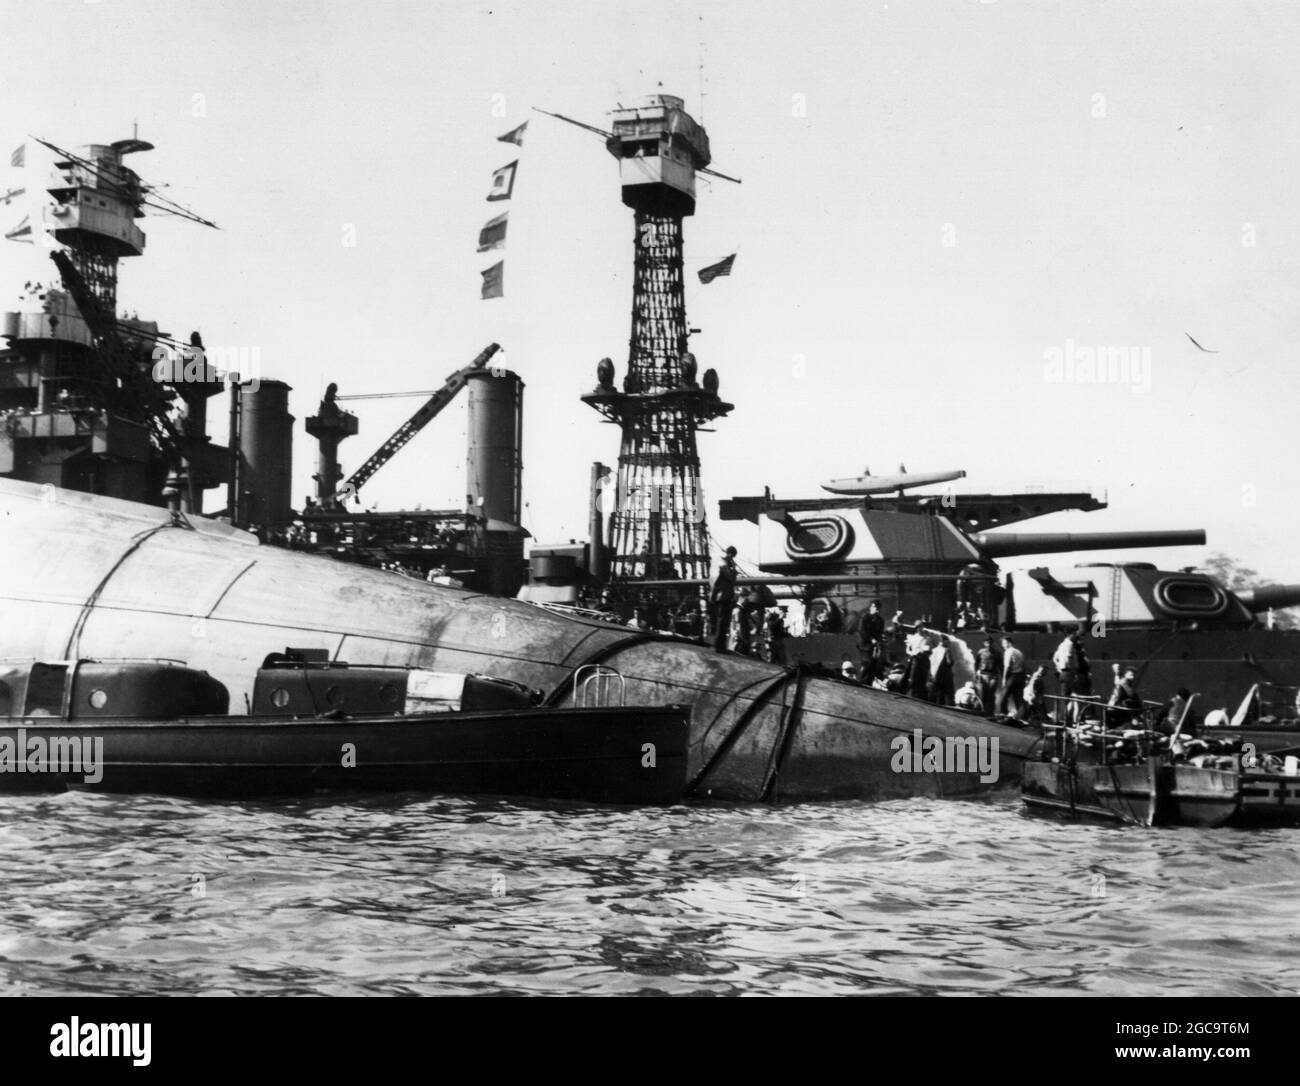 The capsized USS Oklahhoma after the Japanese attack on Pearl Harbor, Dec. 7 1941. Stock Photo